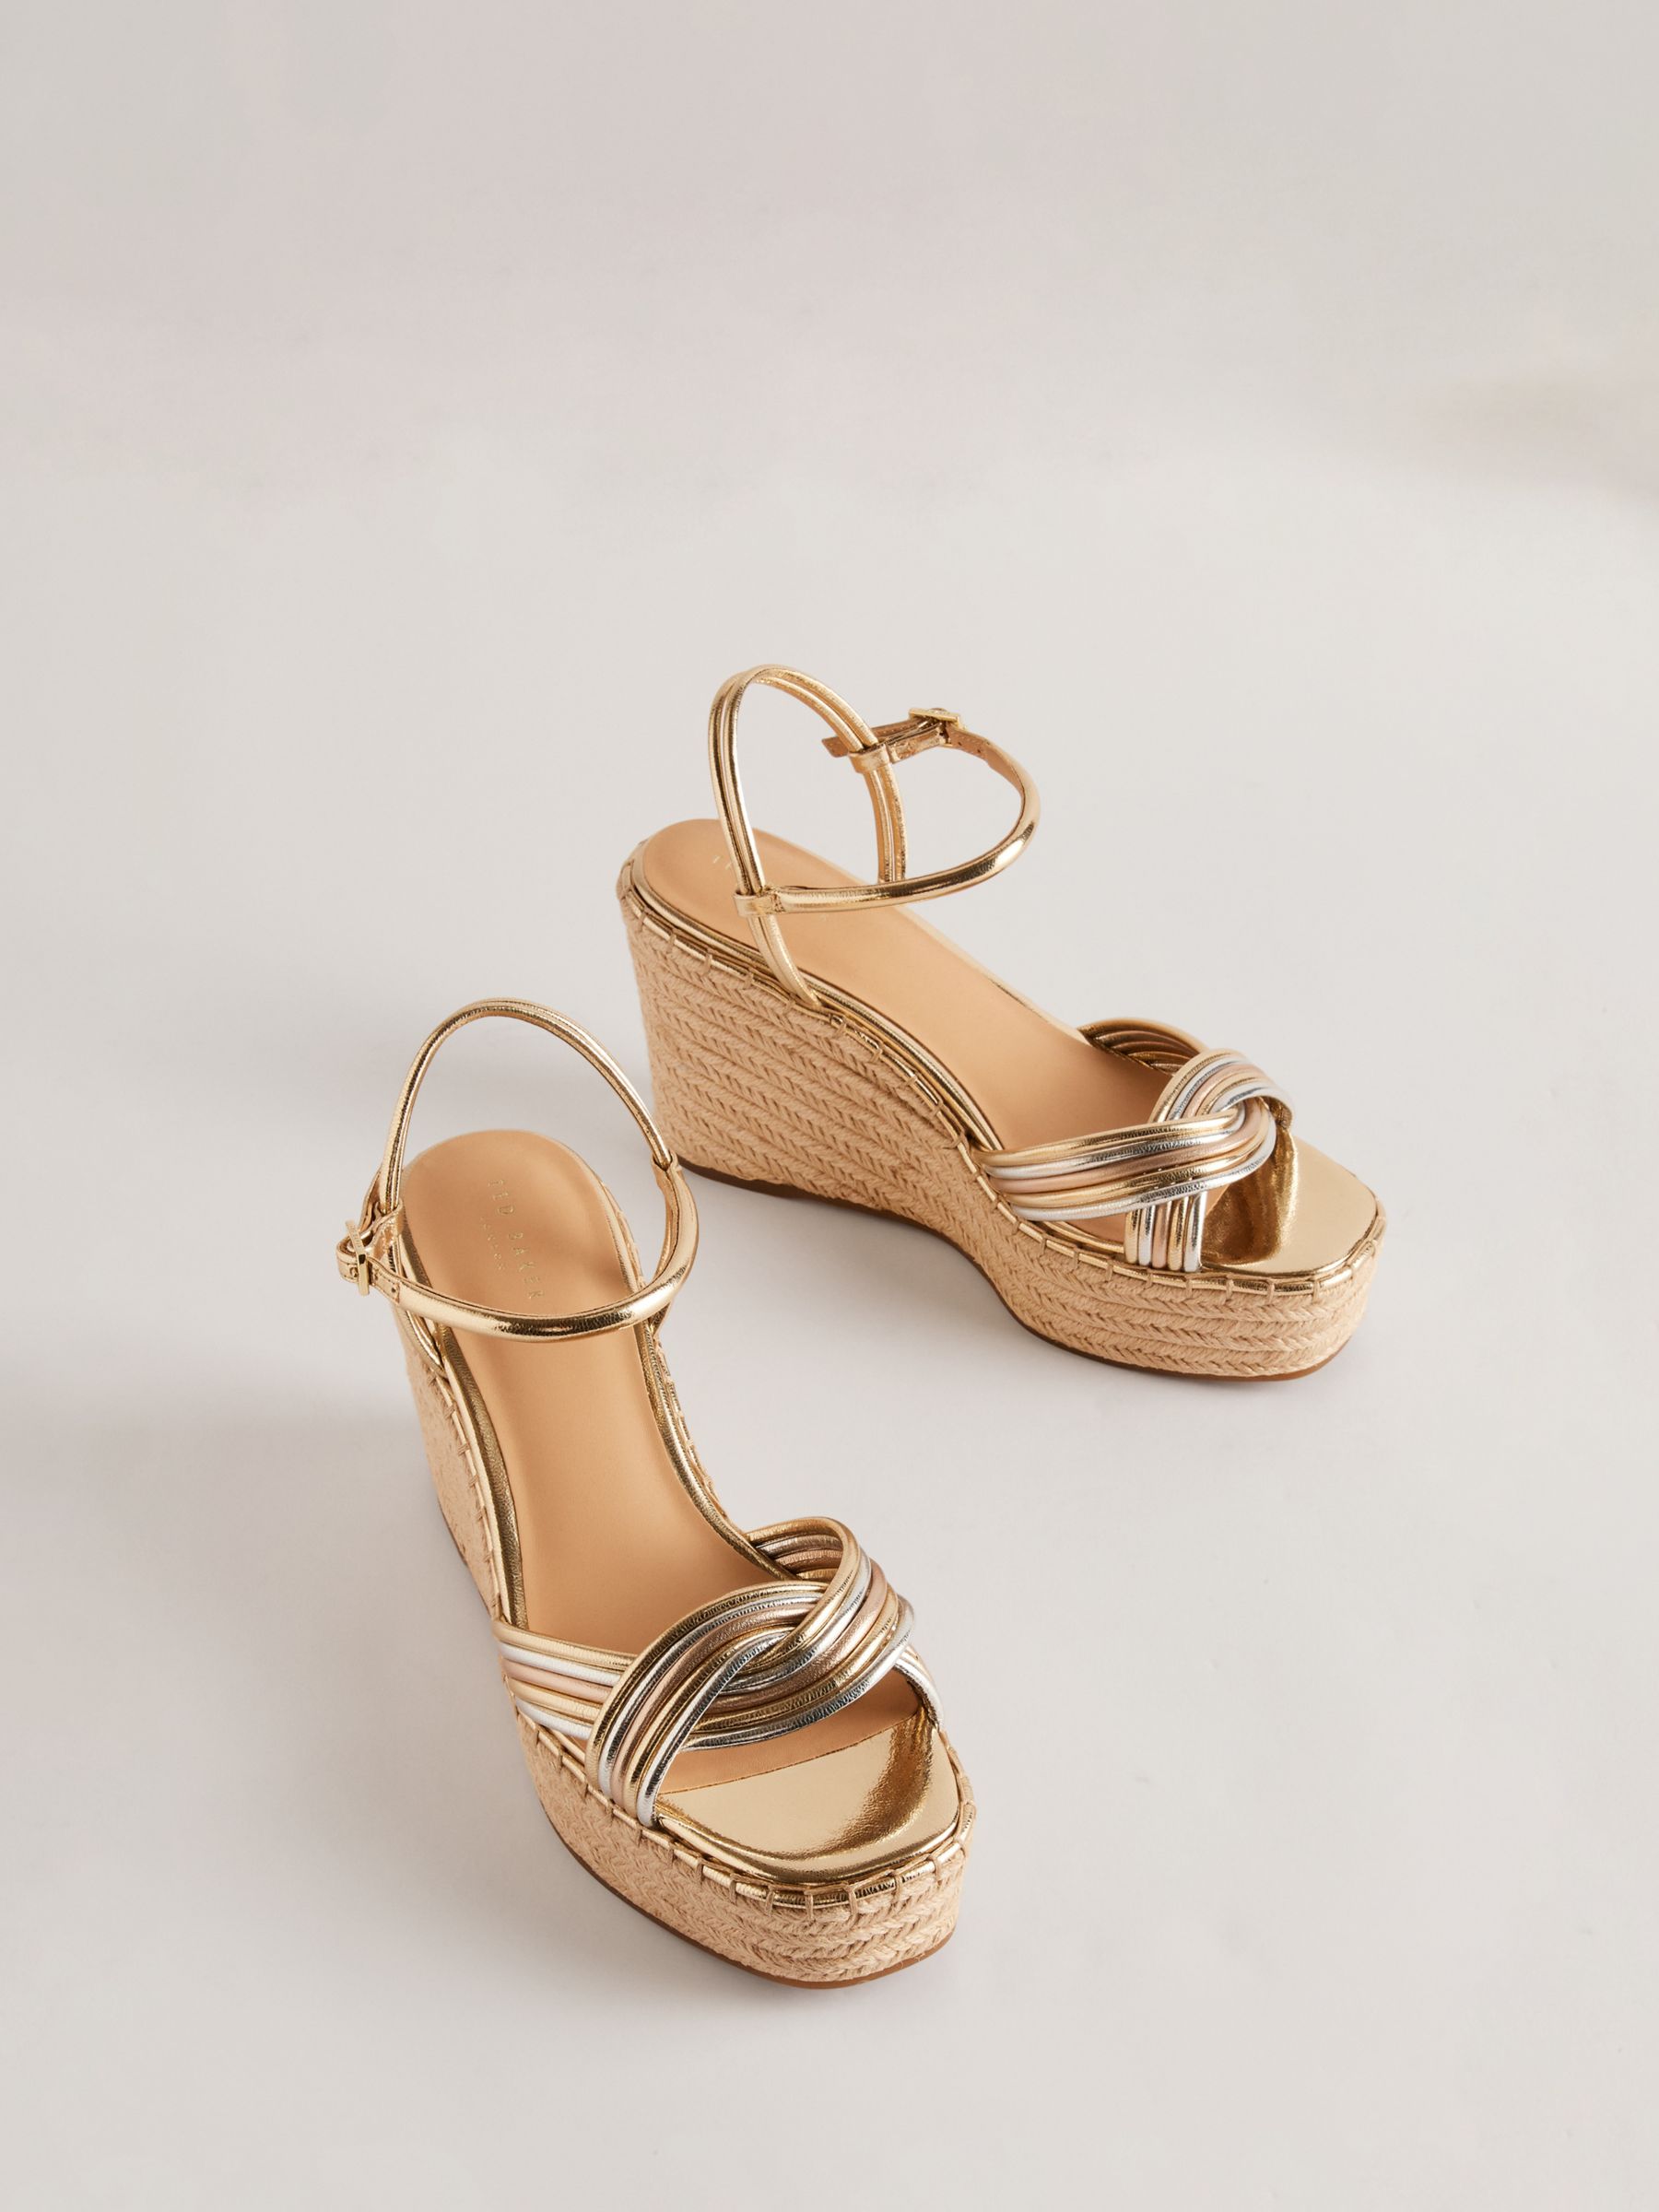 Ted Baker Amaalia Cross Strap Leather Wedge Sandals, Rose Gold/Silver, EU36